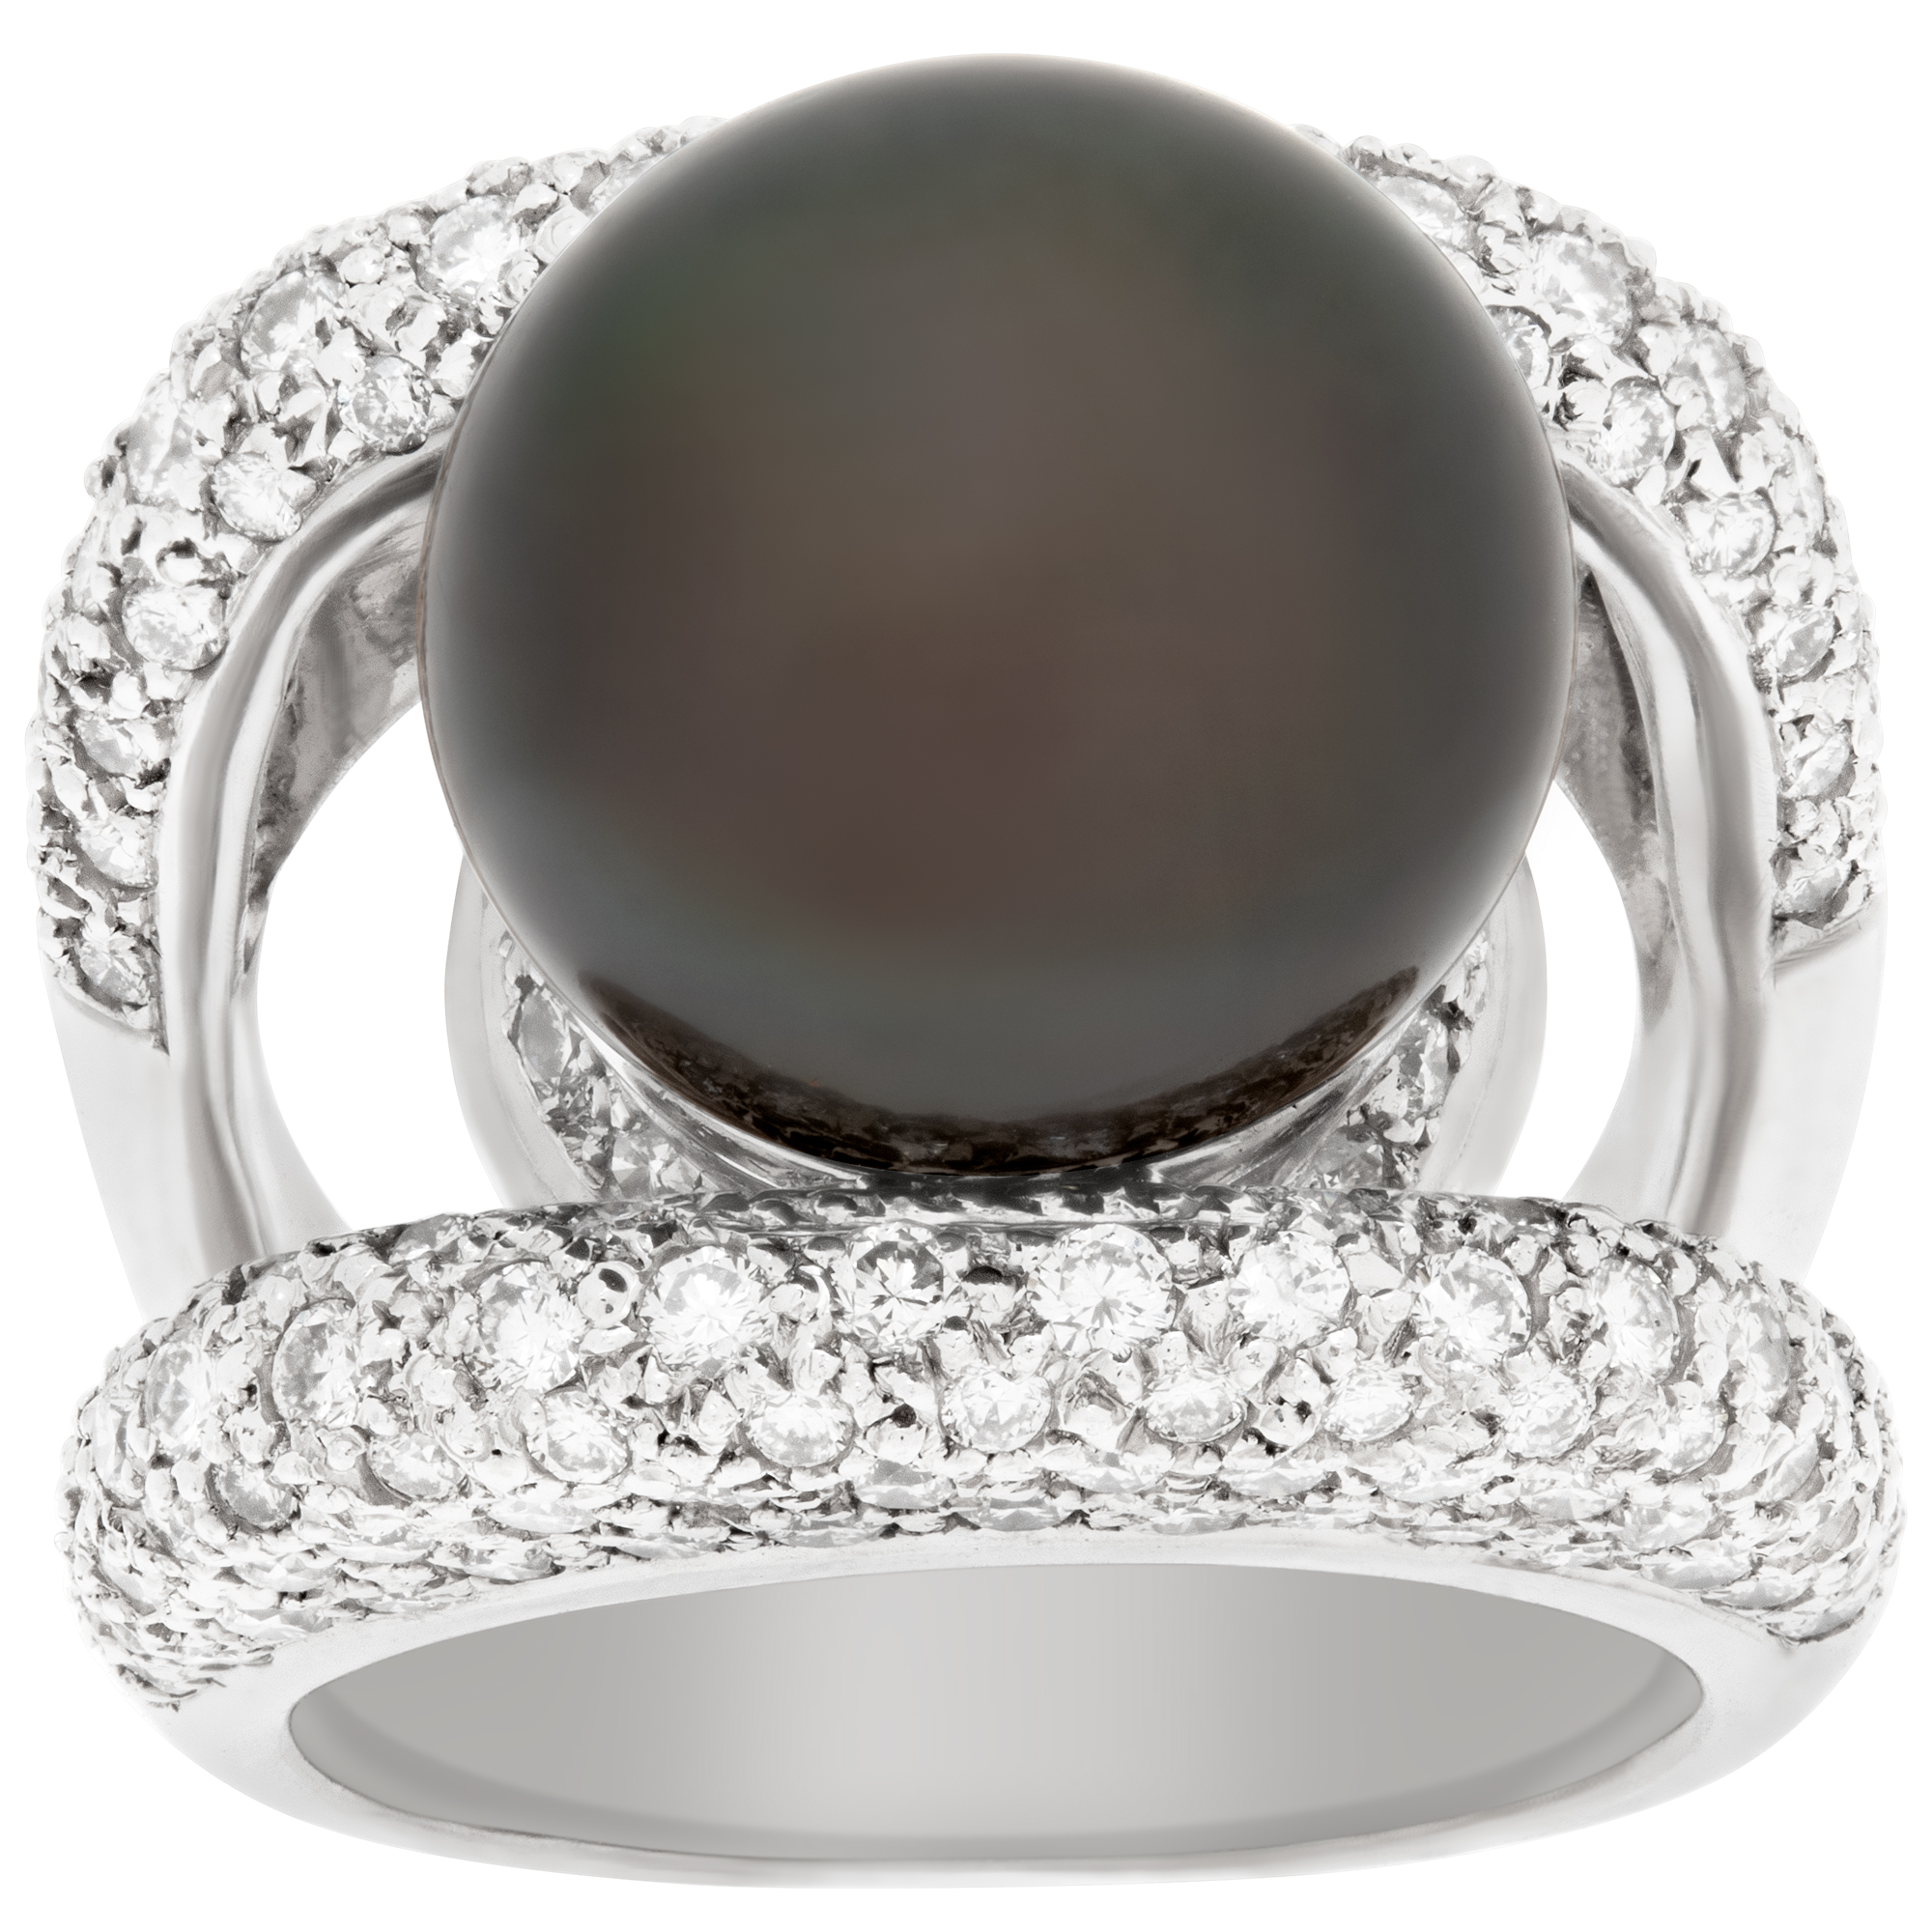 Tahitian pearl and diamond ring in 18k white gold